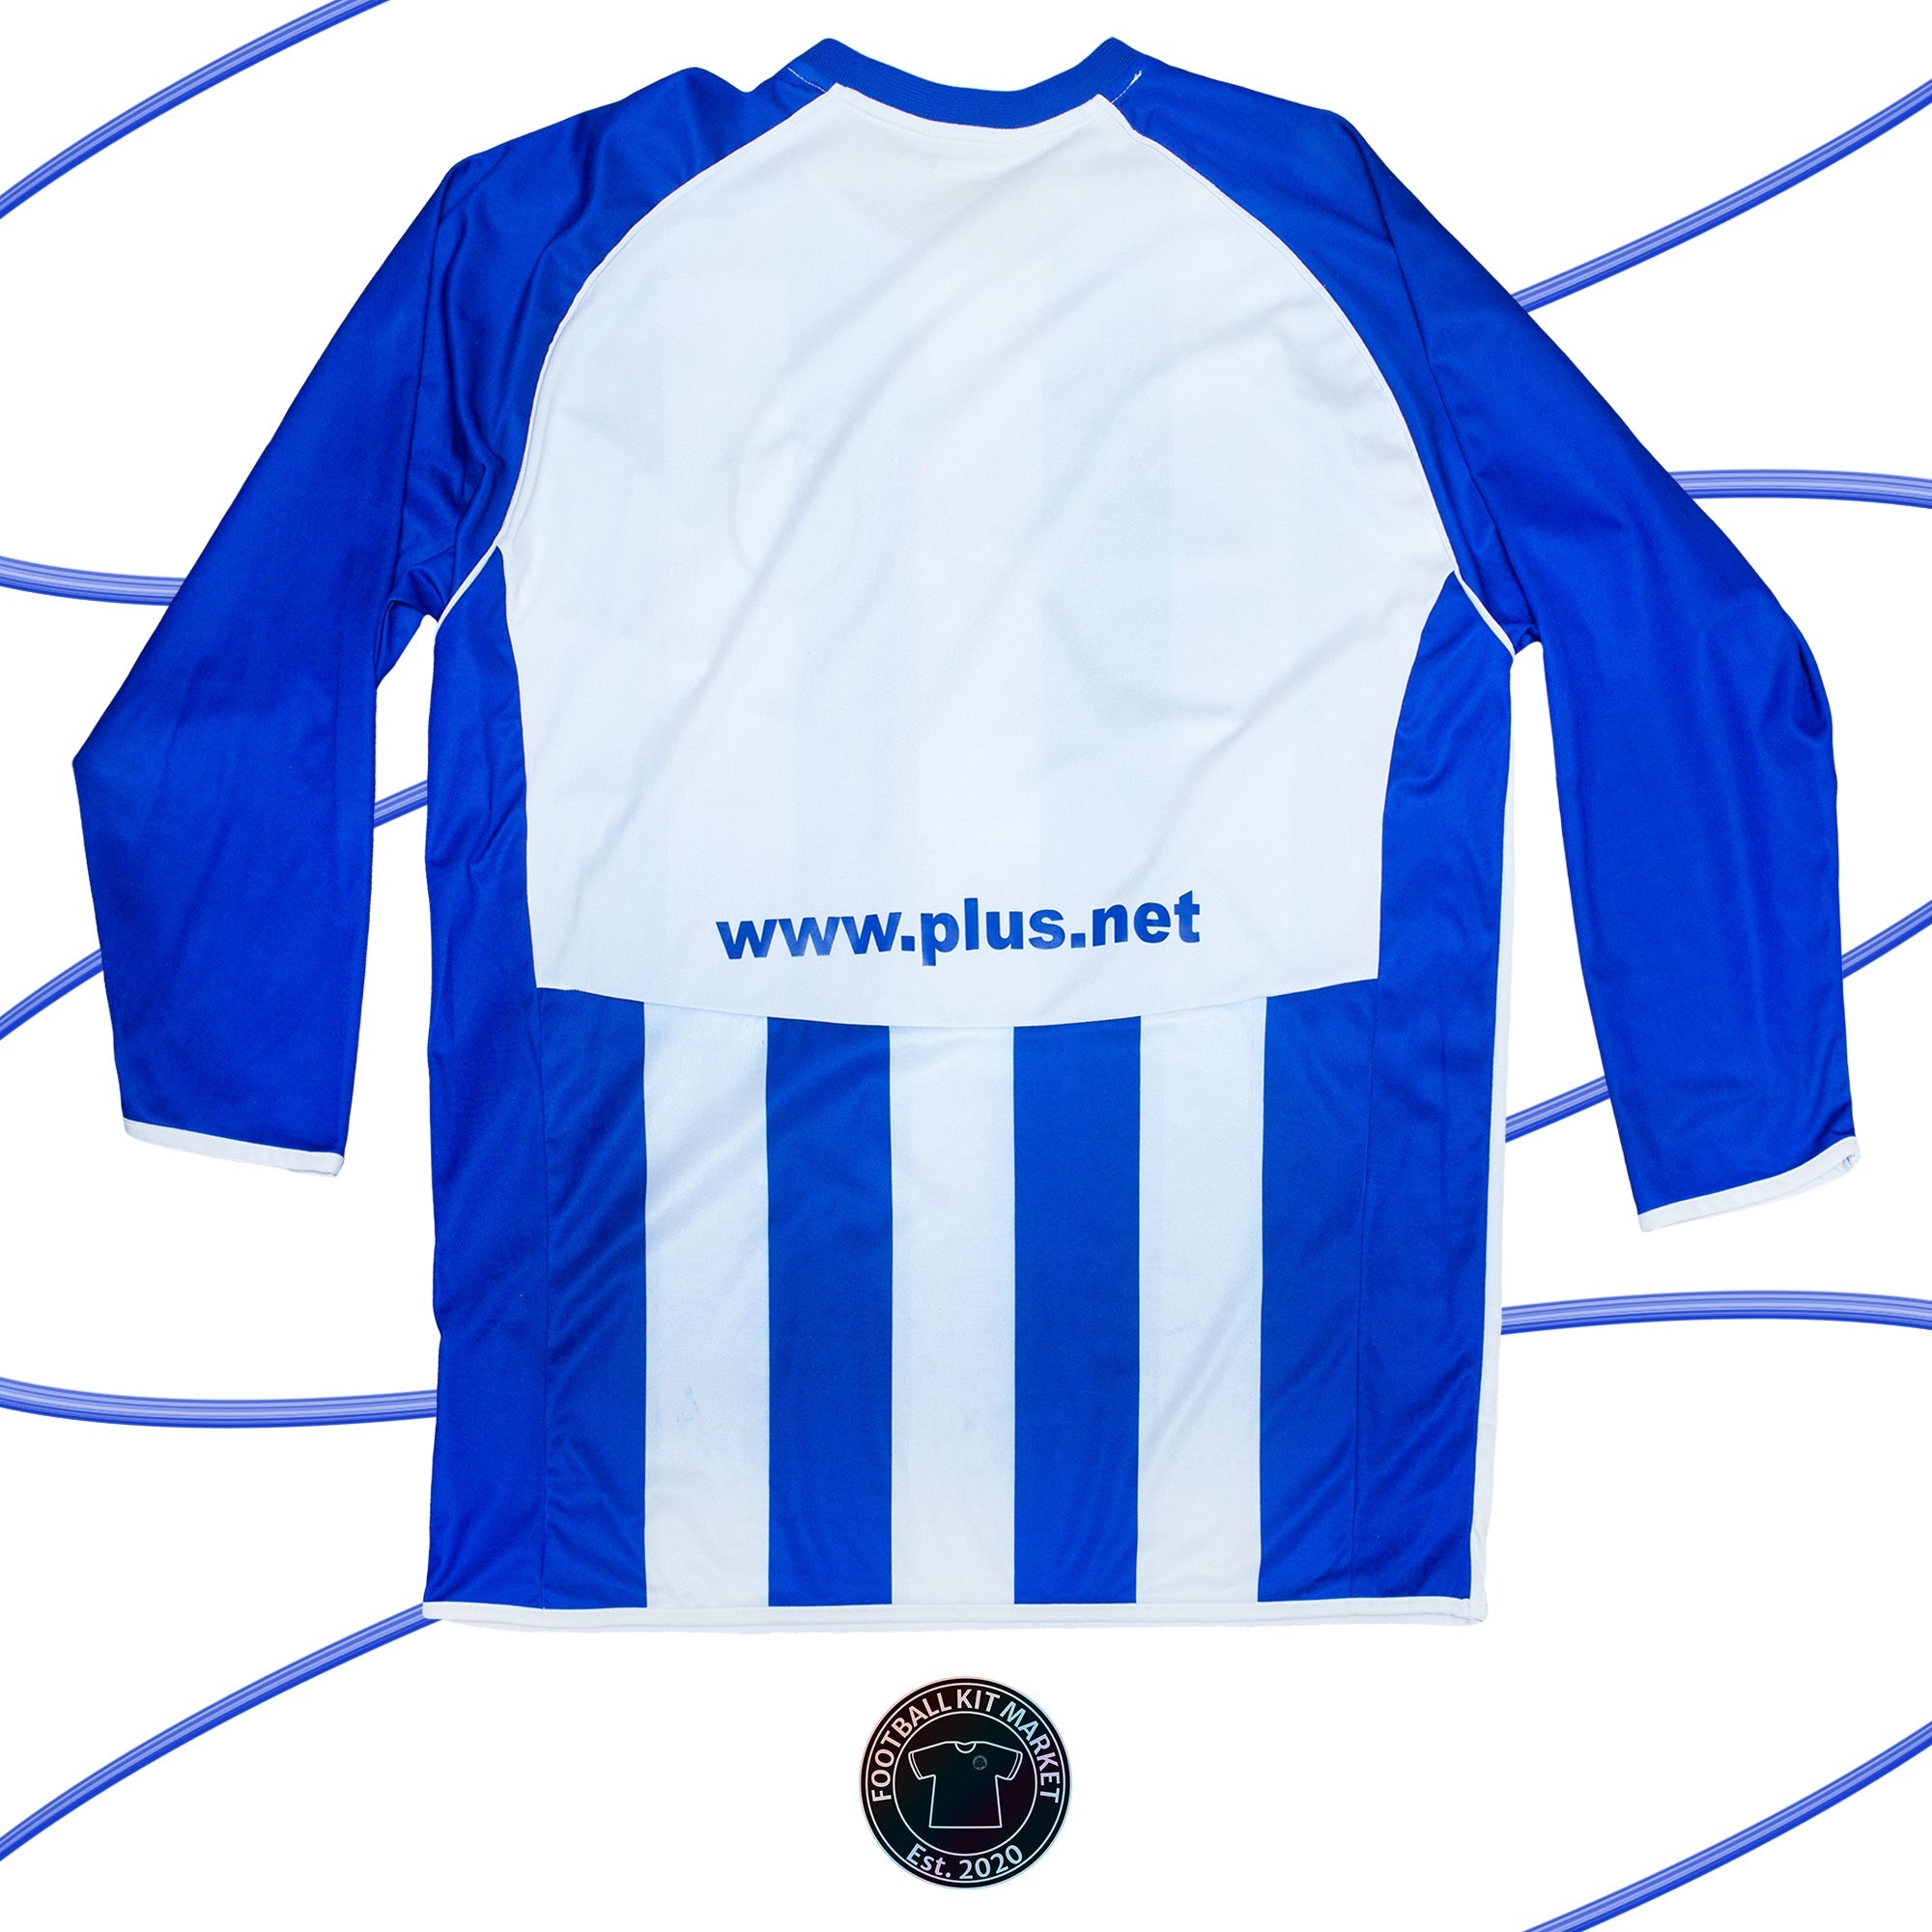 Genuine SHEFFIELD WEDNESDAY Home Shirt (2008-2009) - LOTTO (XL) - Product Image from Football Kit Market